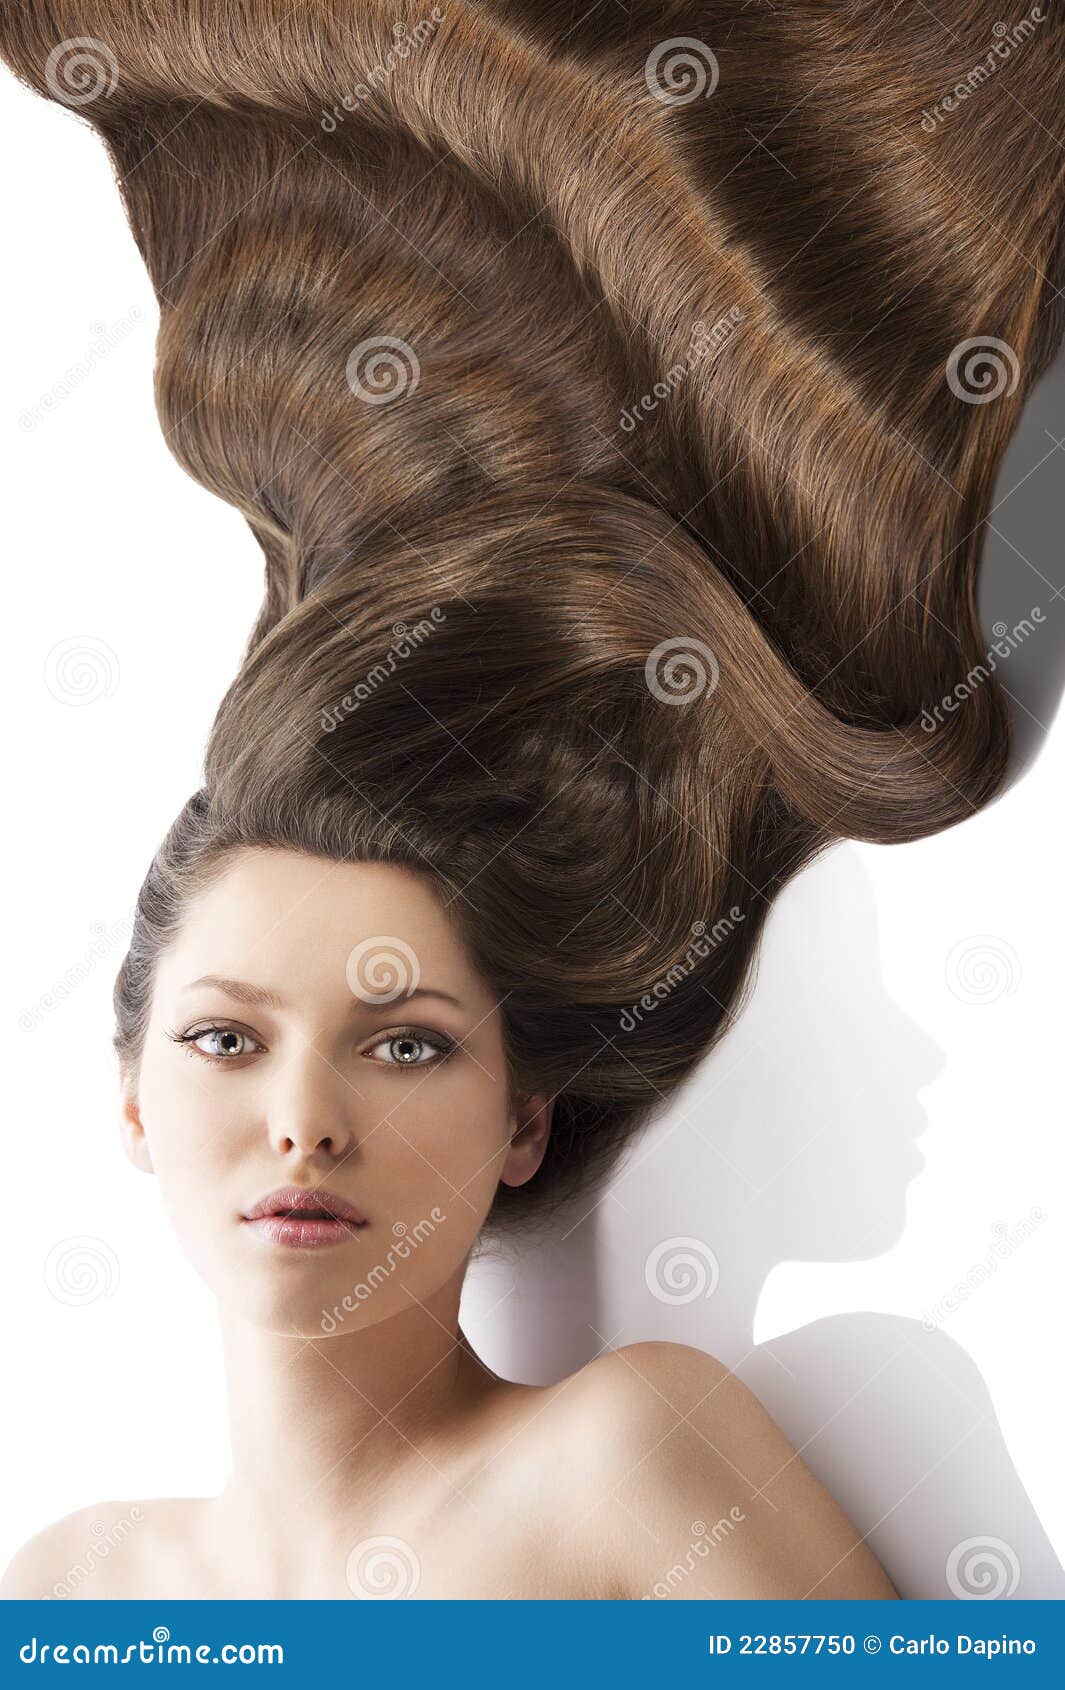 beauty young girl hairstyle,and a lot of hair